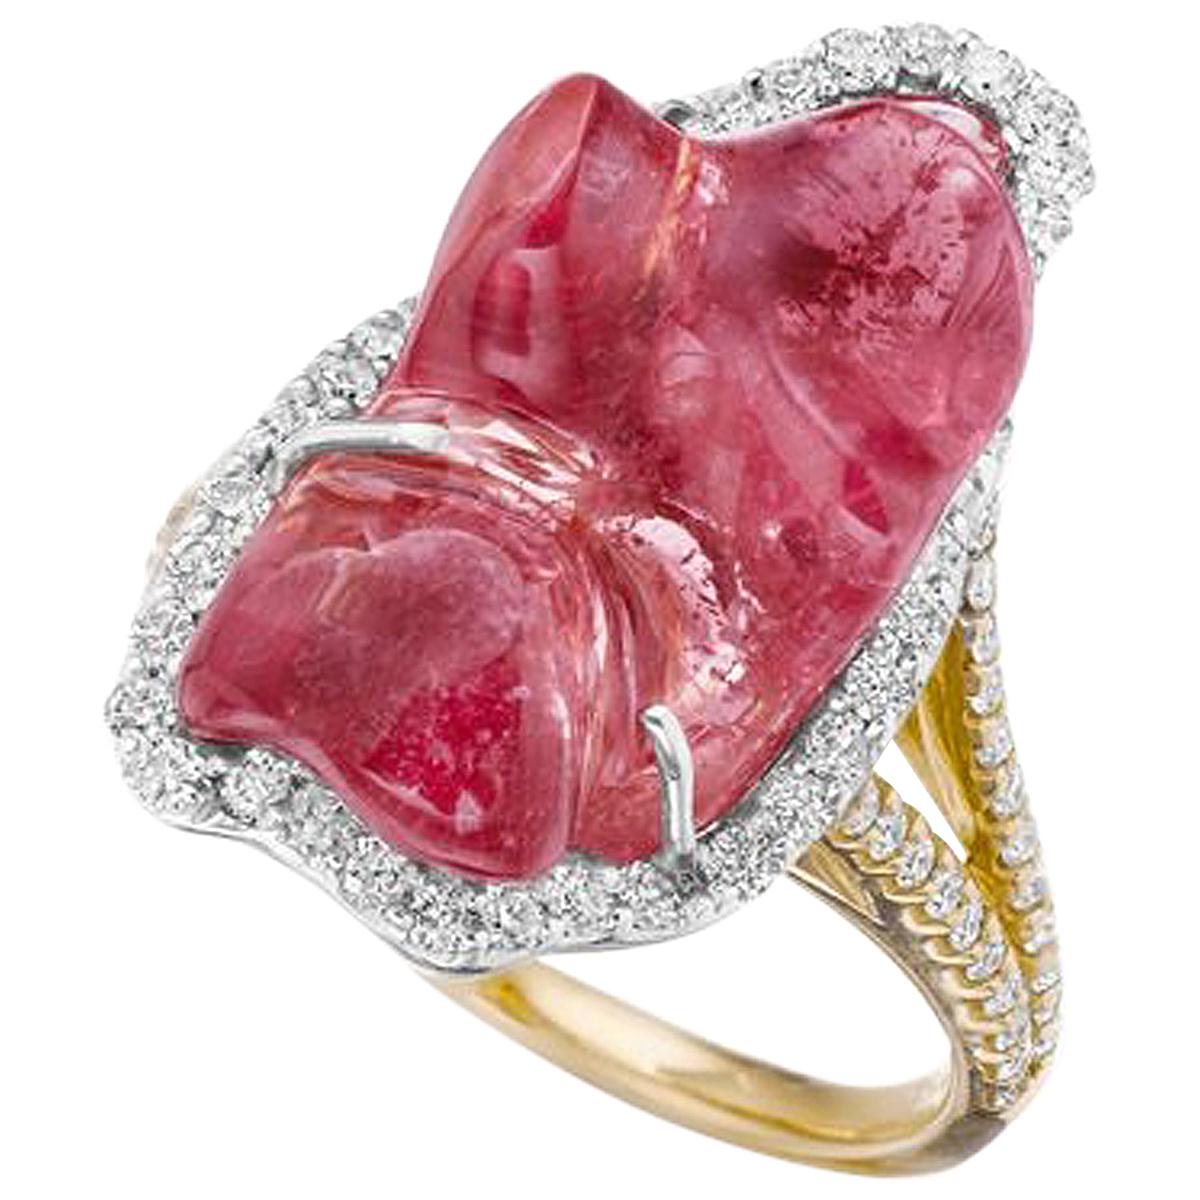 Pink Spinel and Gold Ring by Kimberly McDonald